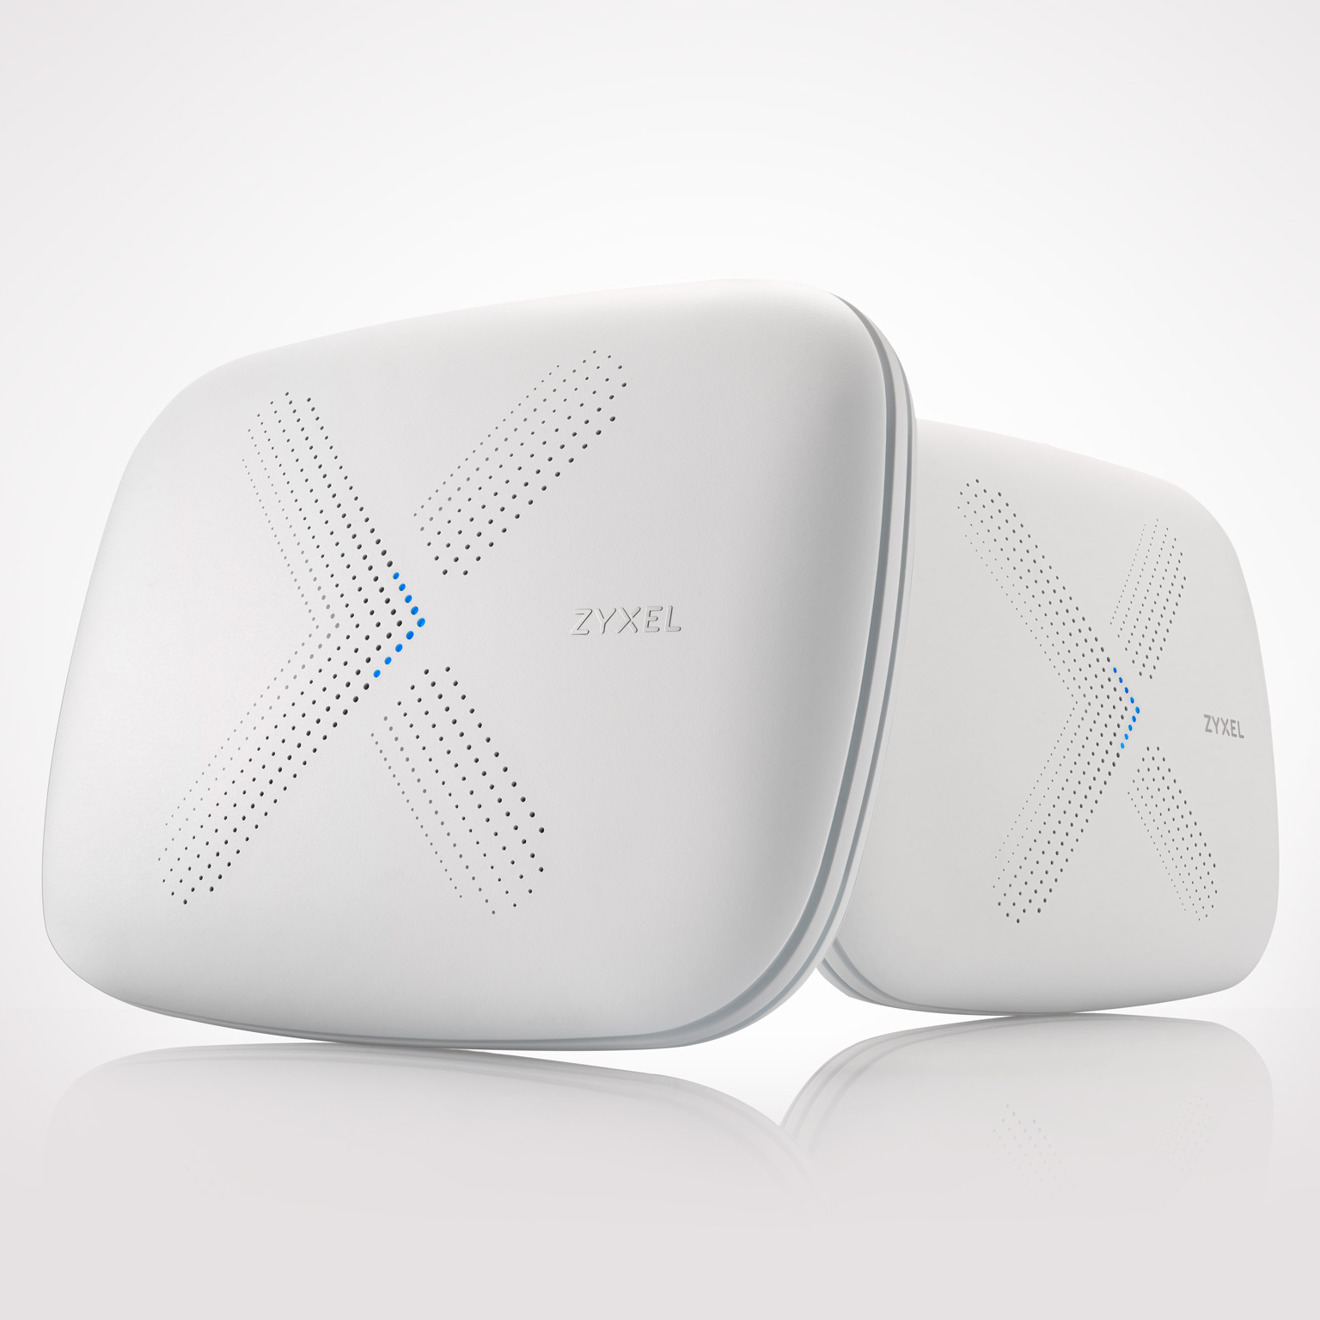 mikro snemand måske Review: Zyxel MultyX is a decent Airport Extreme replacement for the home,  with a big configuration problem | AppleInsider